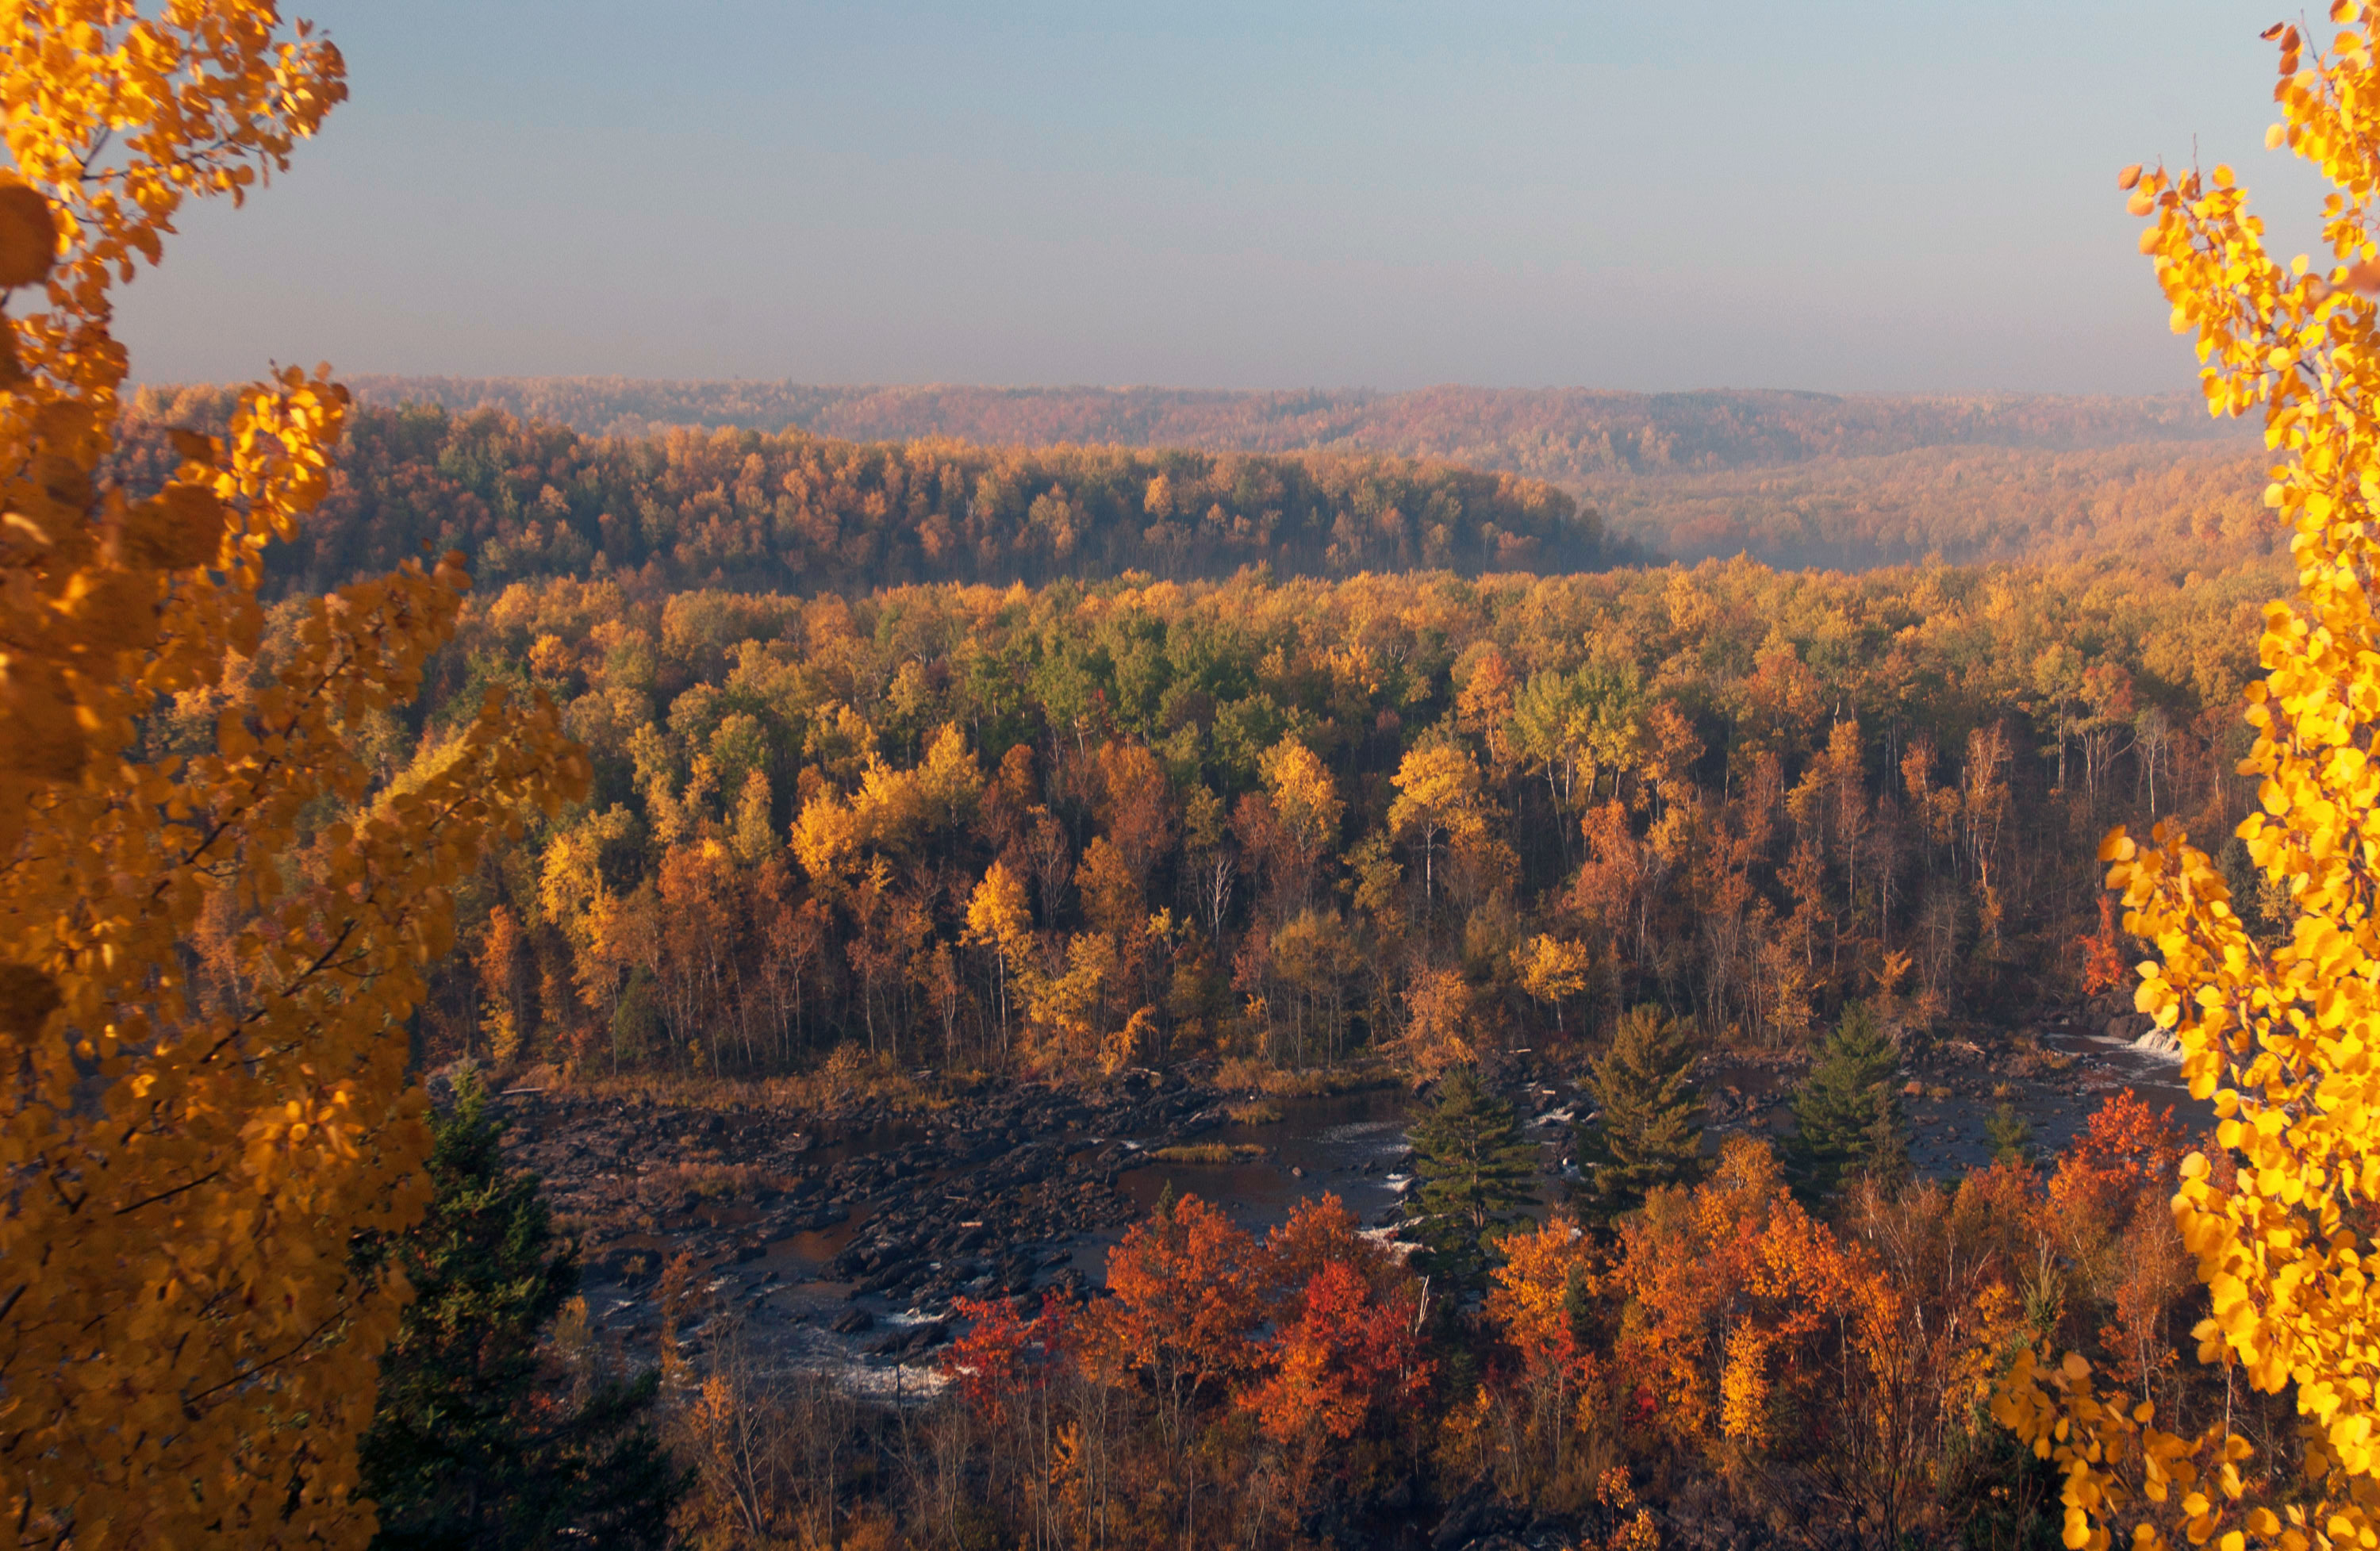 Brilliant autumn foliage on rolling ridges viewed from an elevated point with a rushing river below.